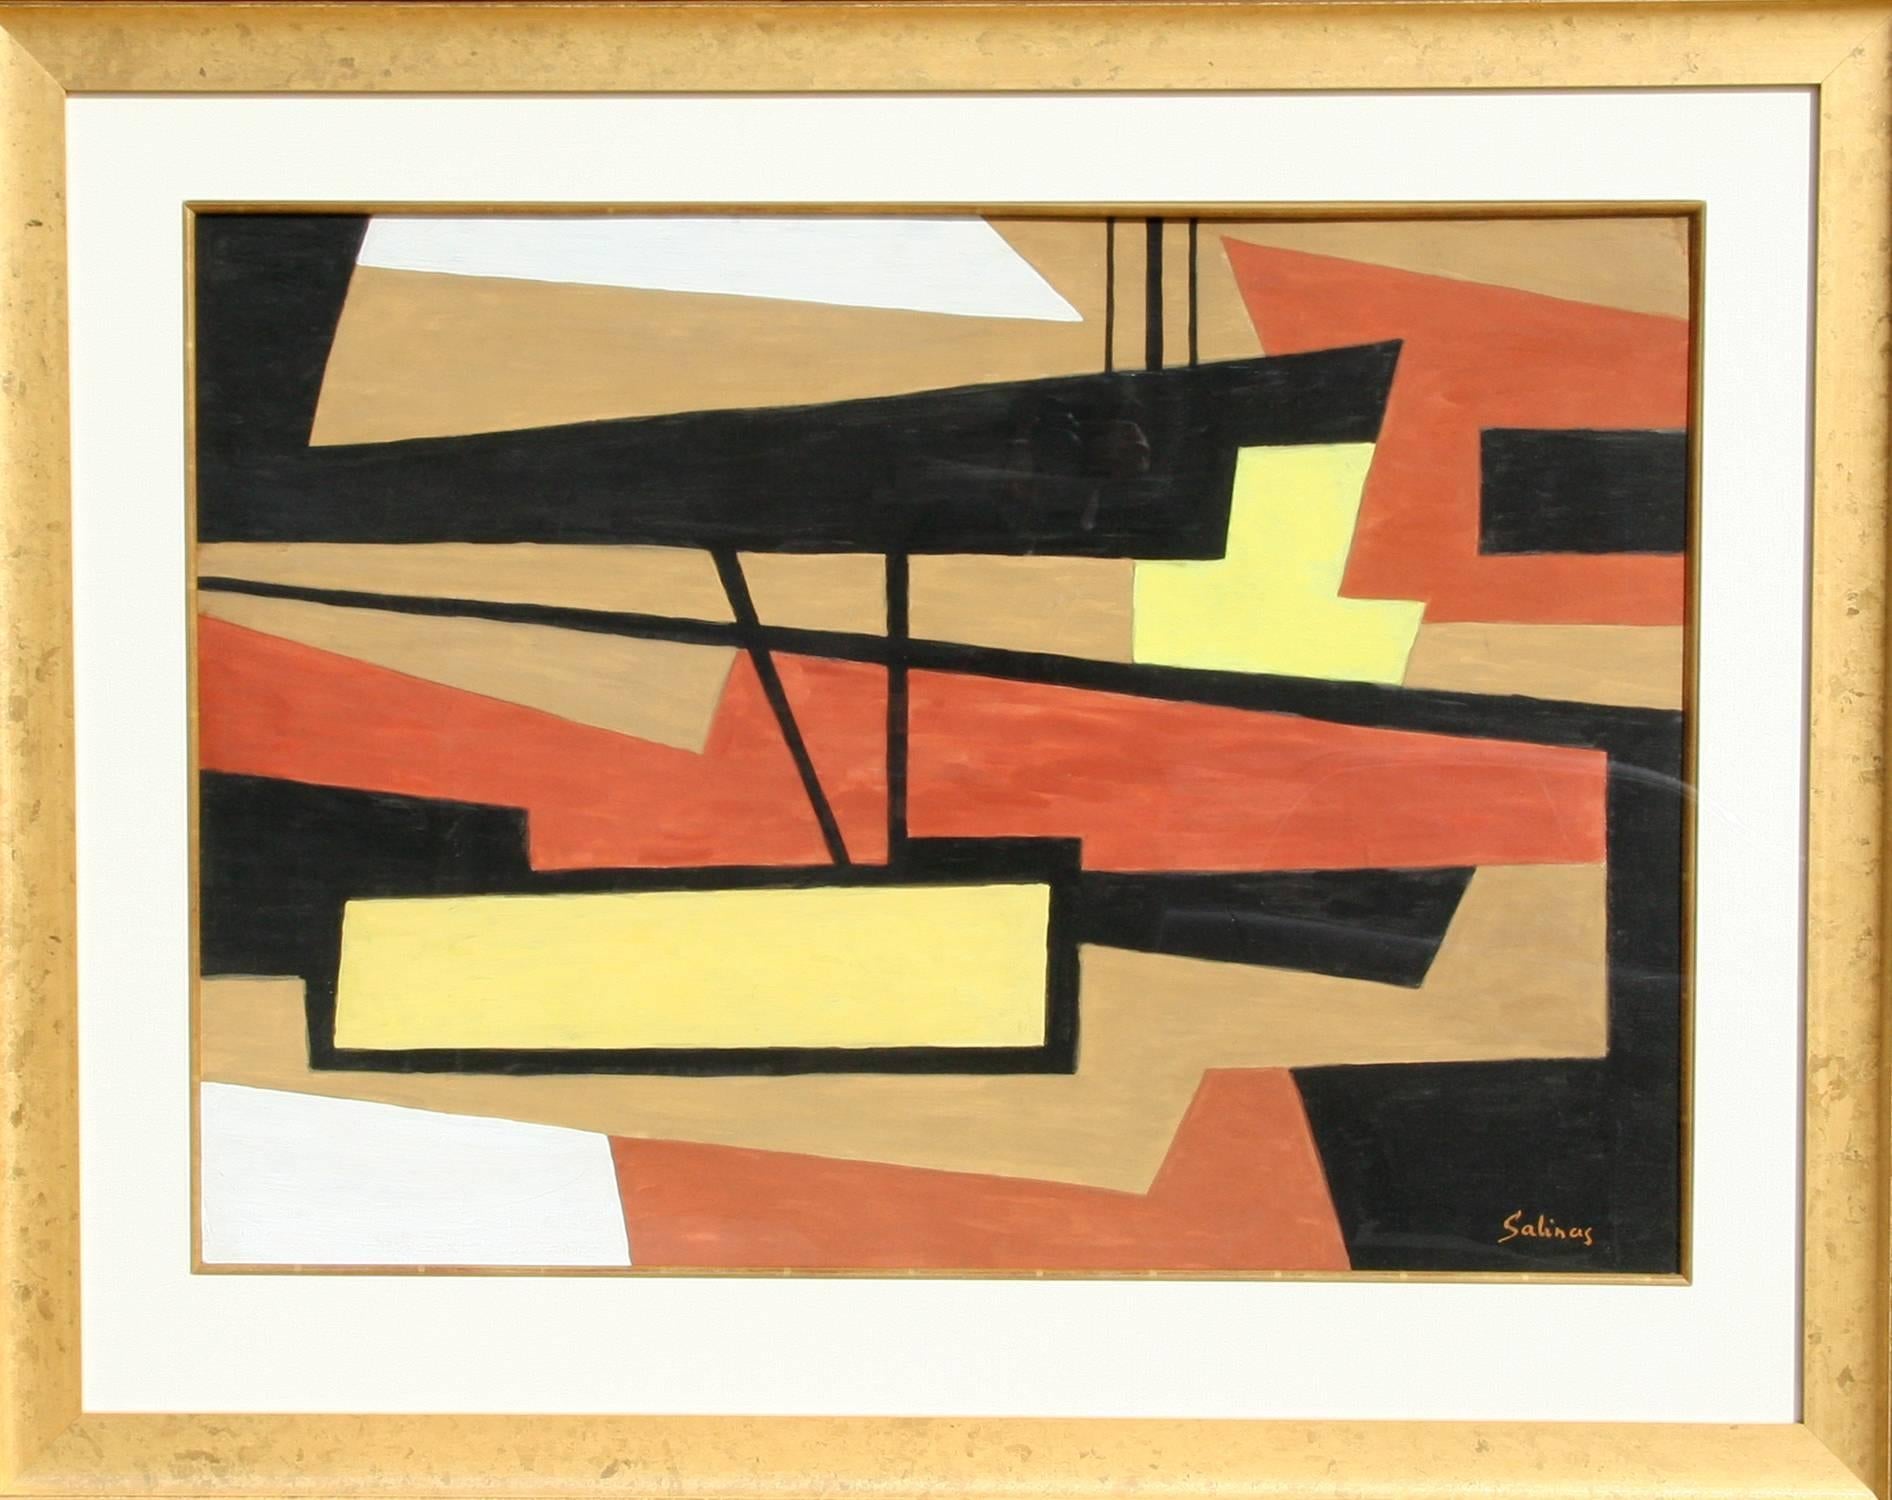 Cubist Abstract, Gouache Painting by Marcel Salinas